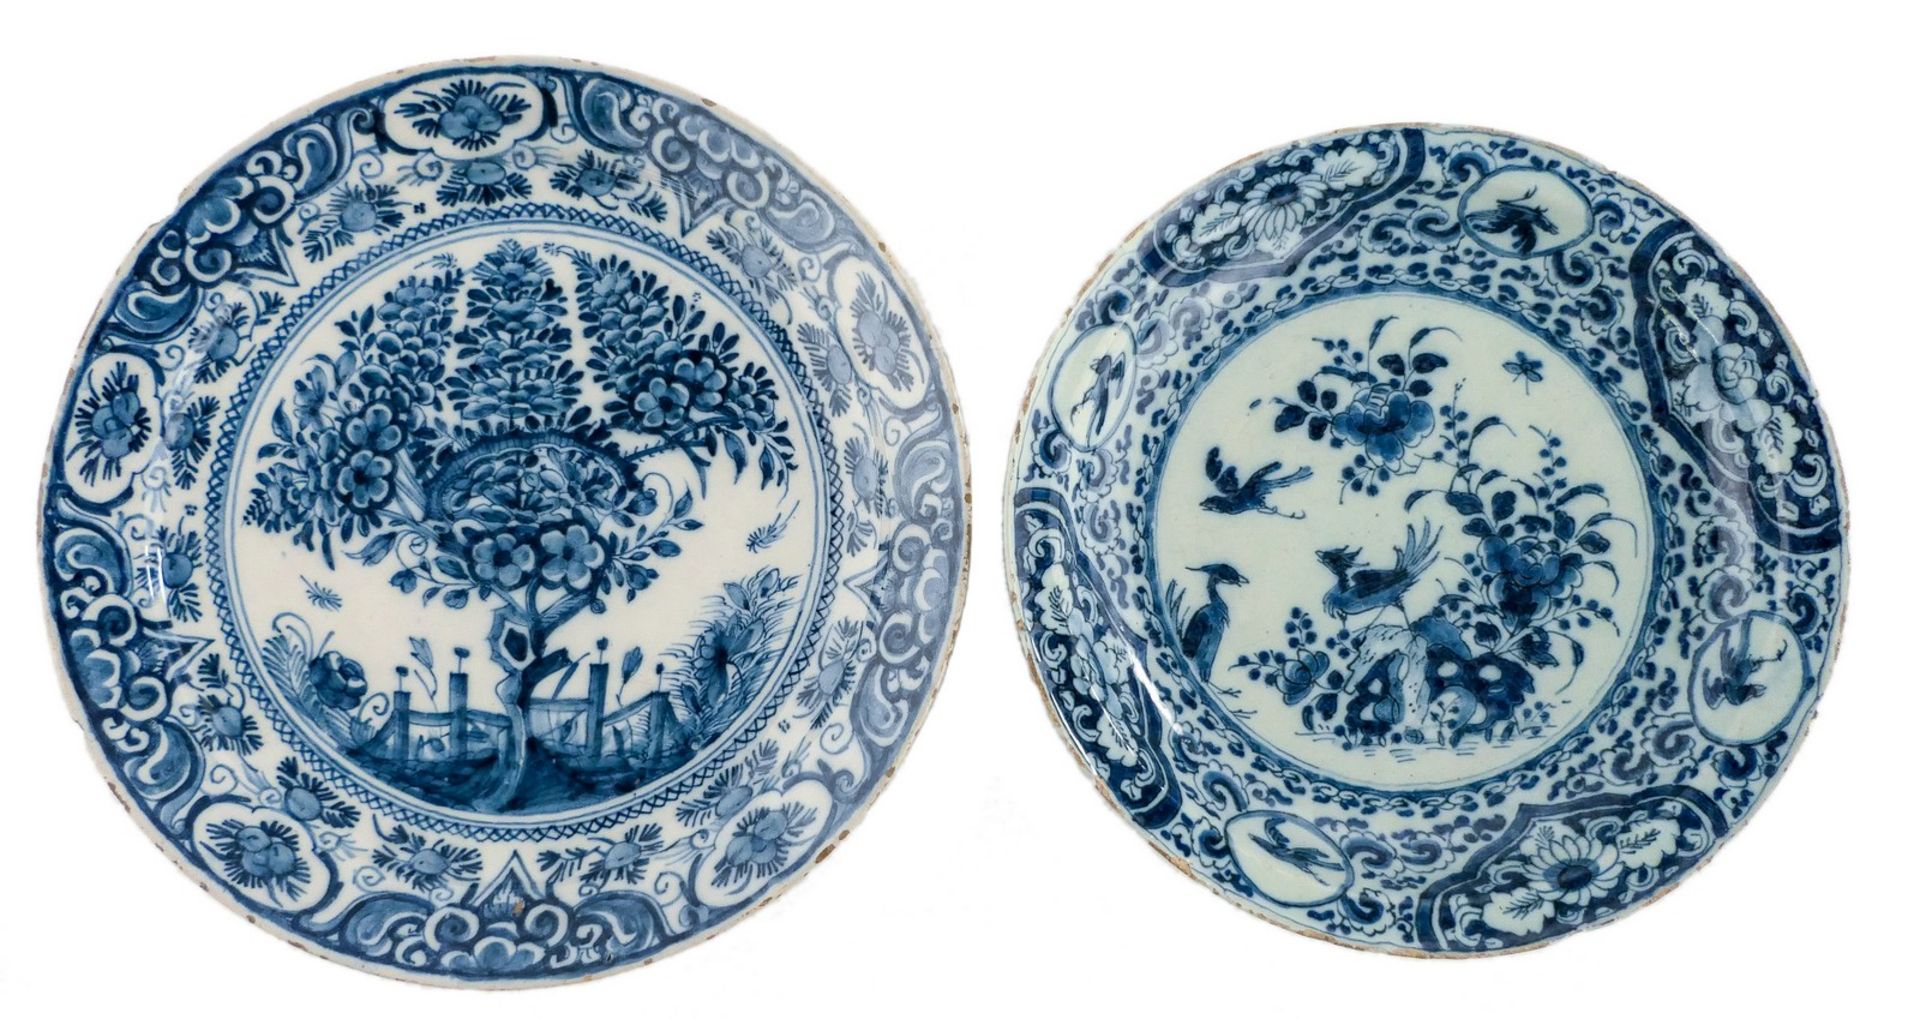 A blue and white 'theeboom' decorated Dutch Delftware plate, marked 'De Witte Starre', Diameter 28